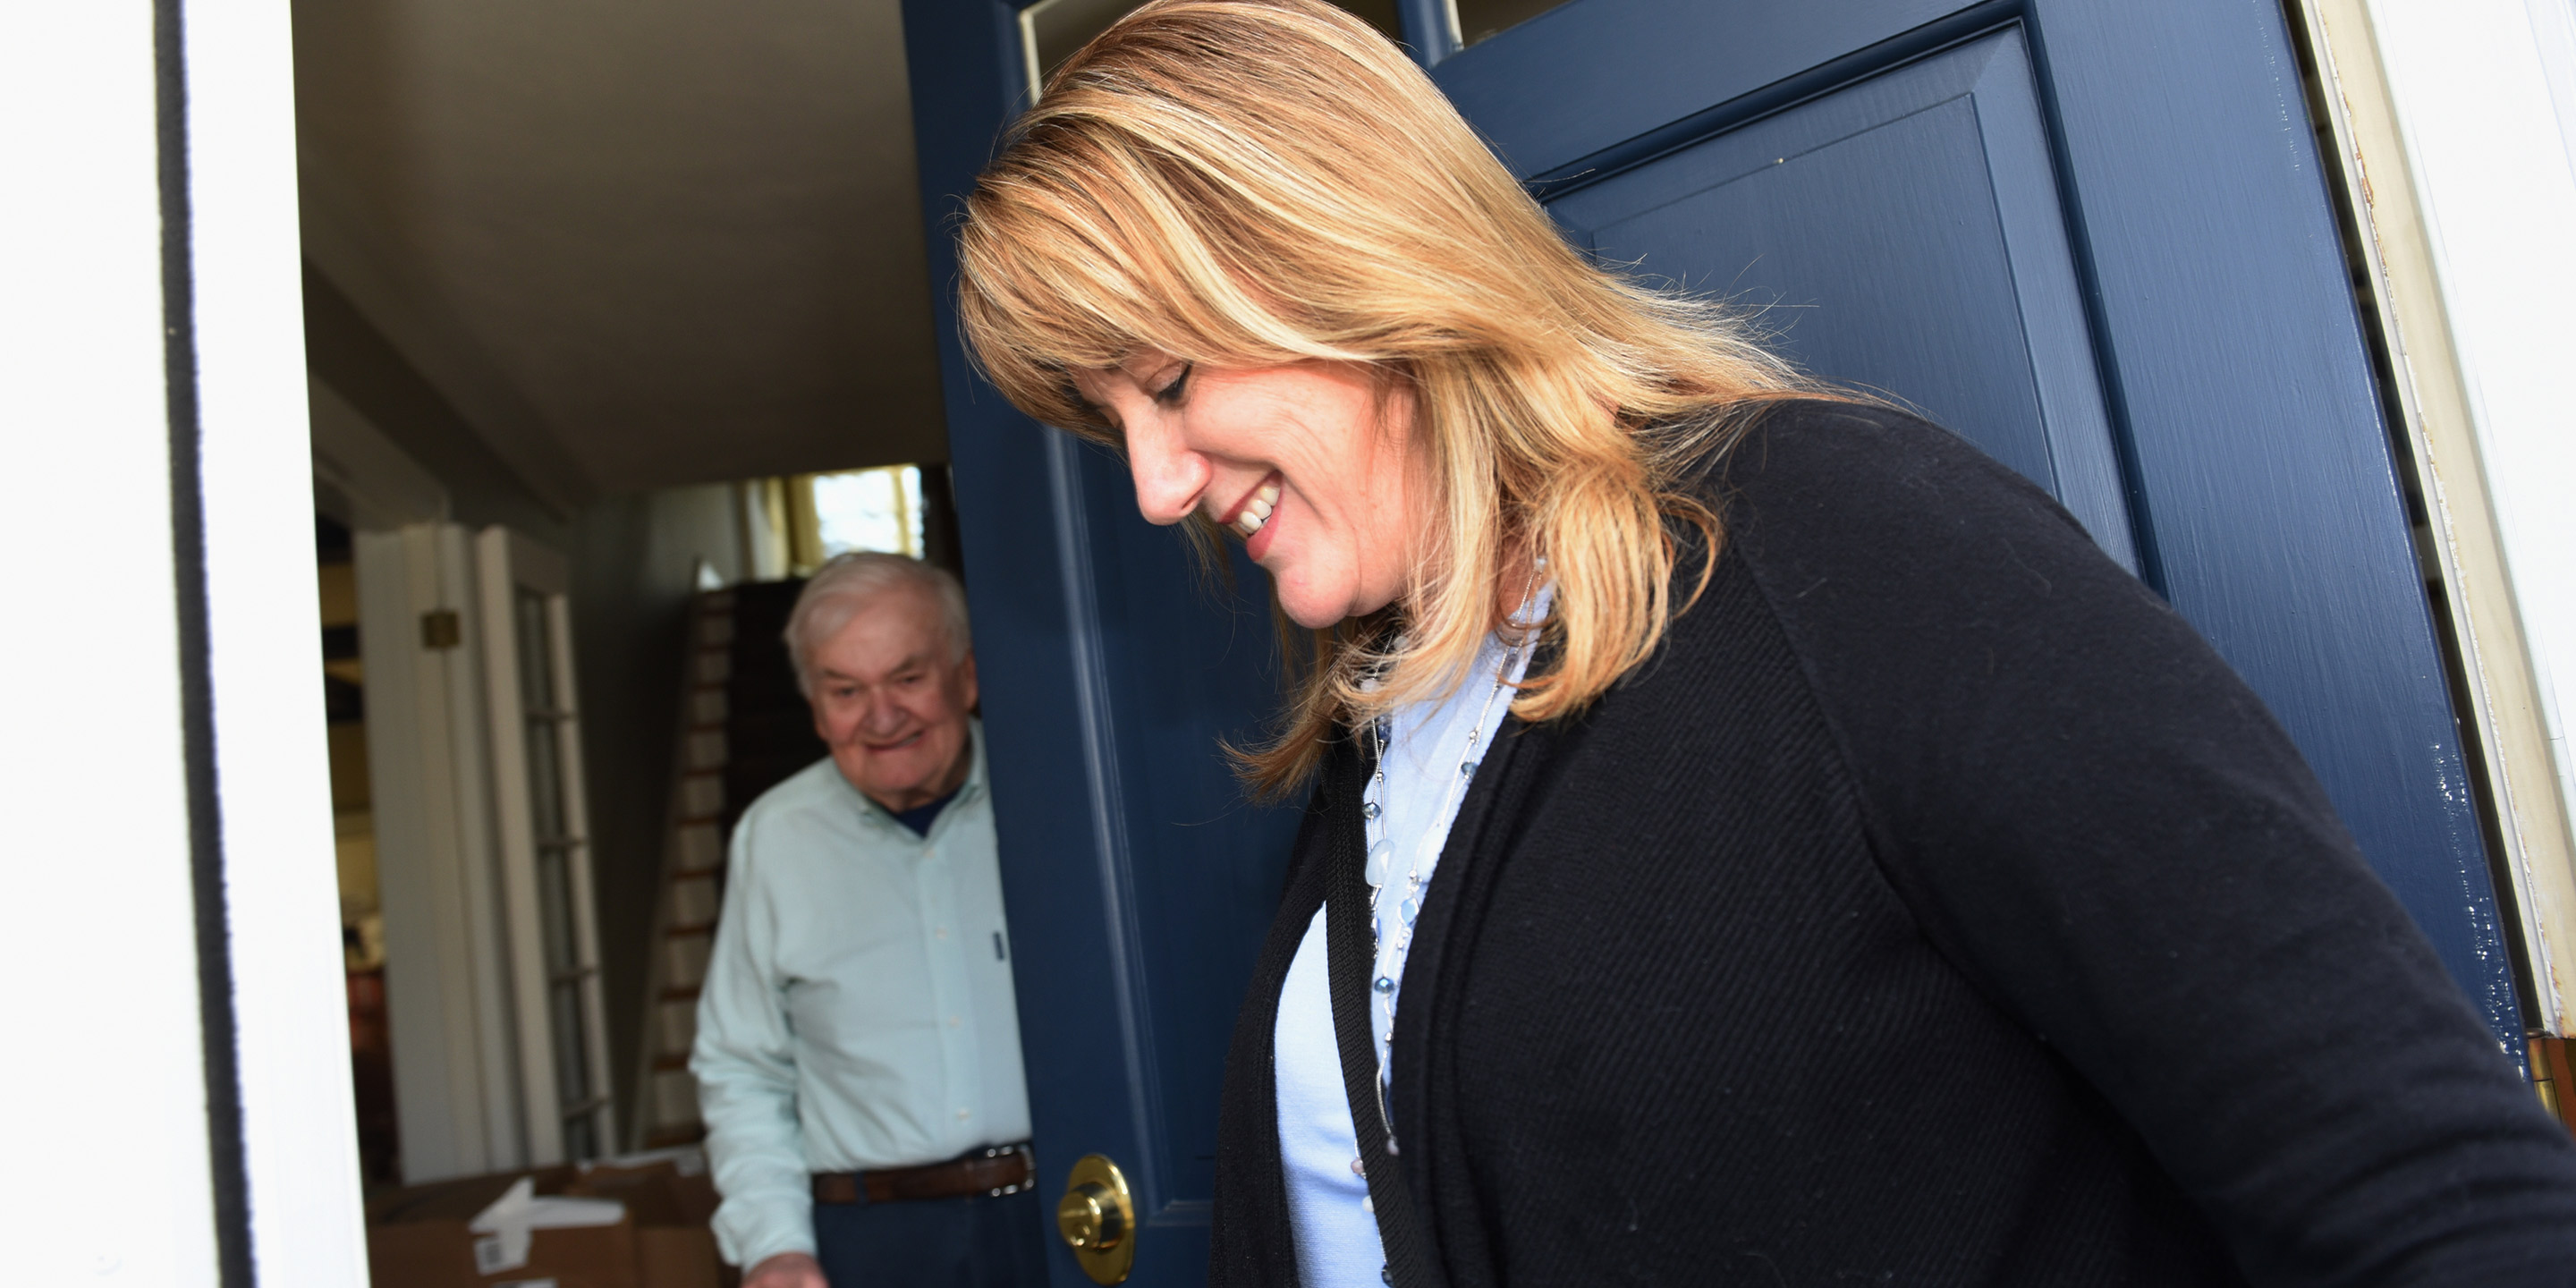 At the doorstep of his house, a nurse from Hebrew SeniorLife Home Health greets older man using a walker